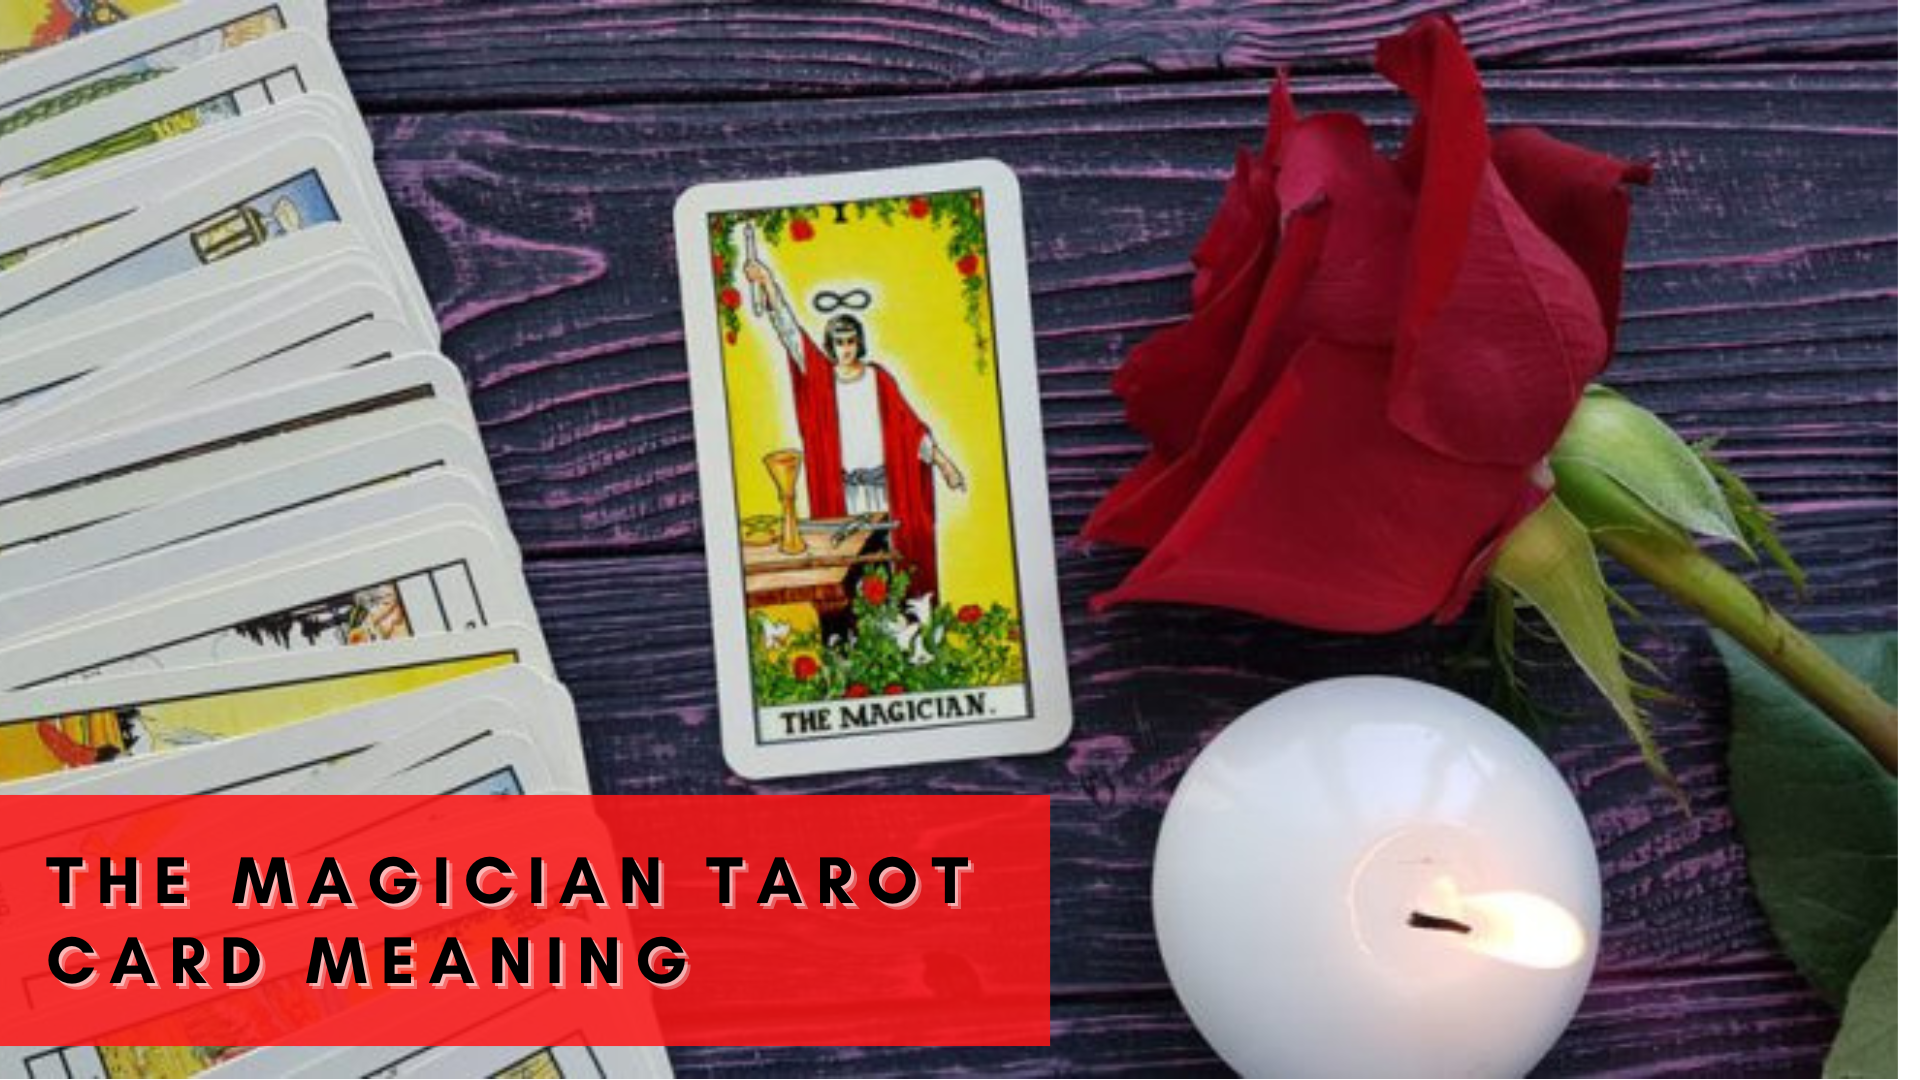 The Magician Tarot Card Meaning - Represents The Power Of Your Desires